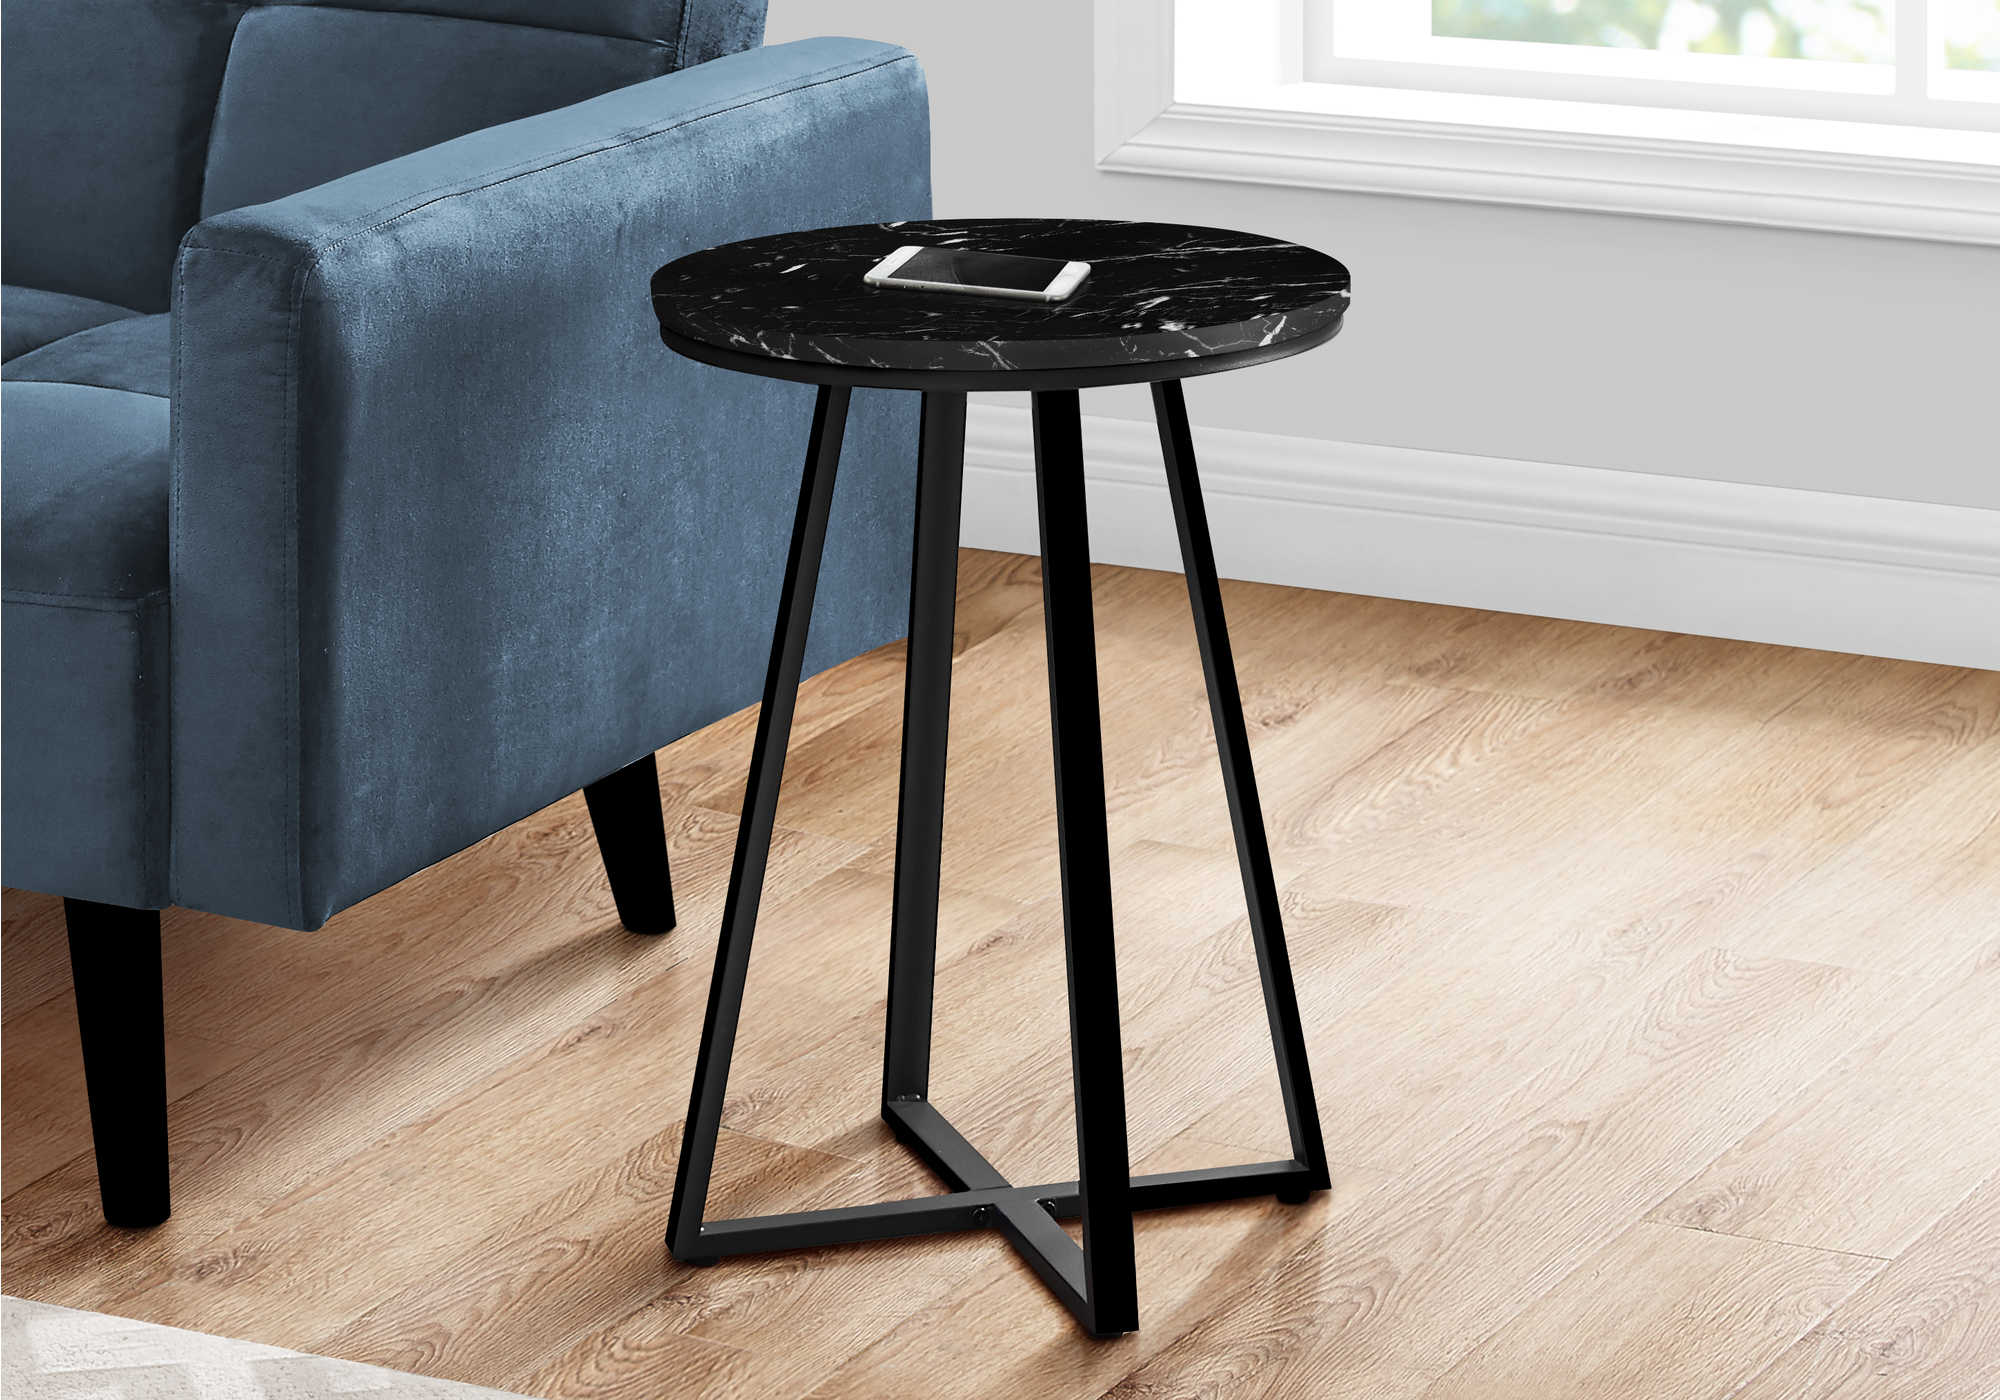 I 2179 - ACCENT TABLE - 22"H / BLACK MARBLE / BLACK METAL BY MONARCH SPECIALTIES INC